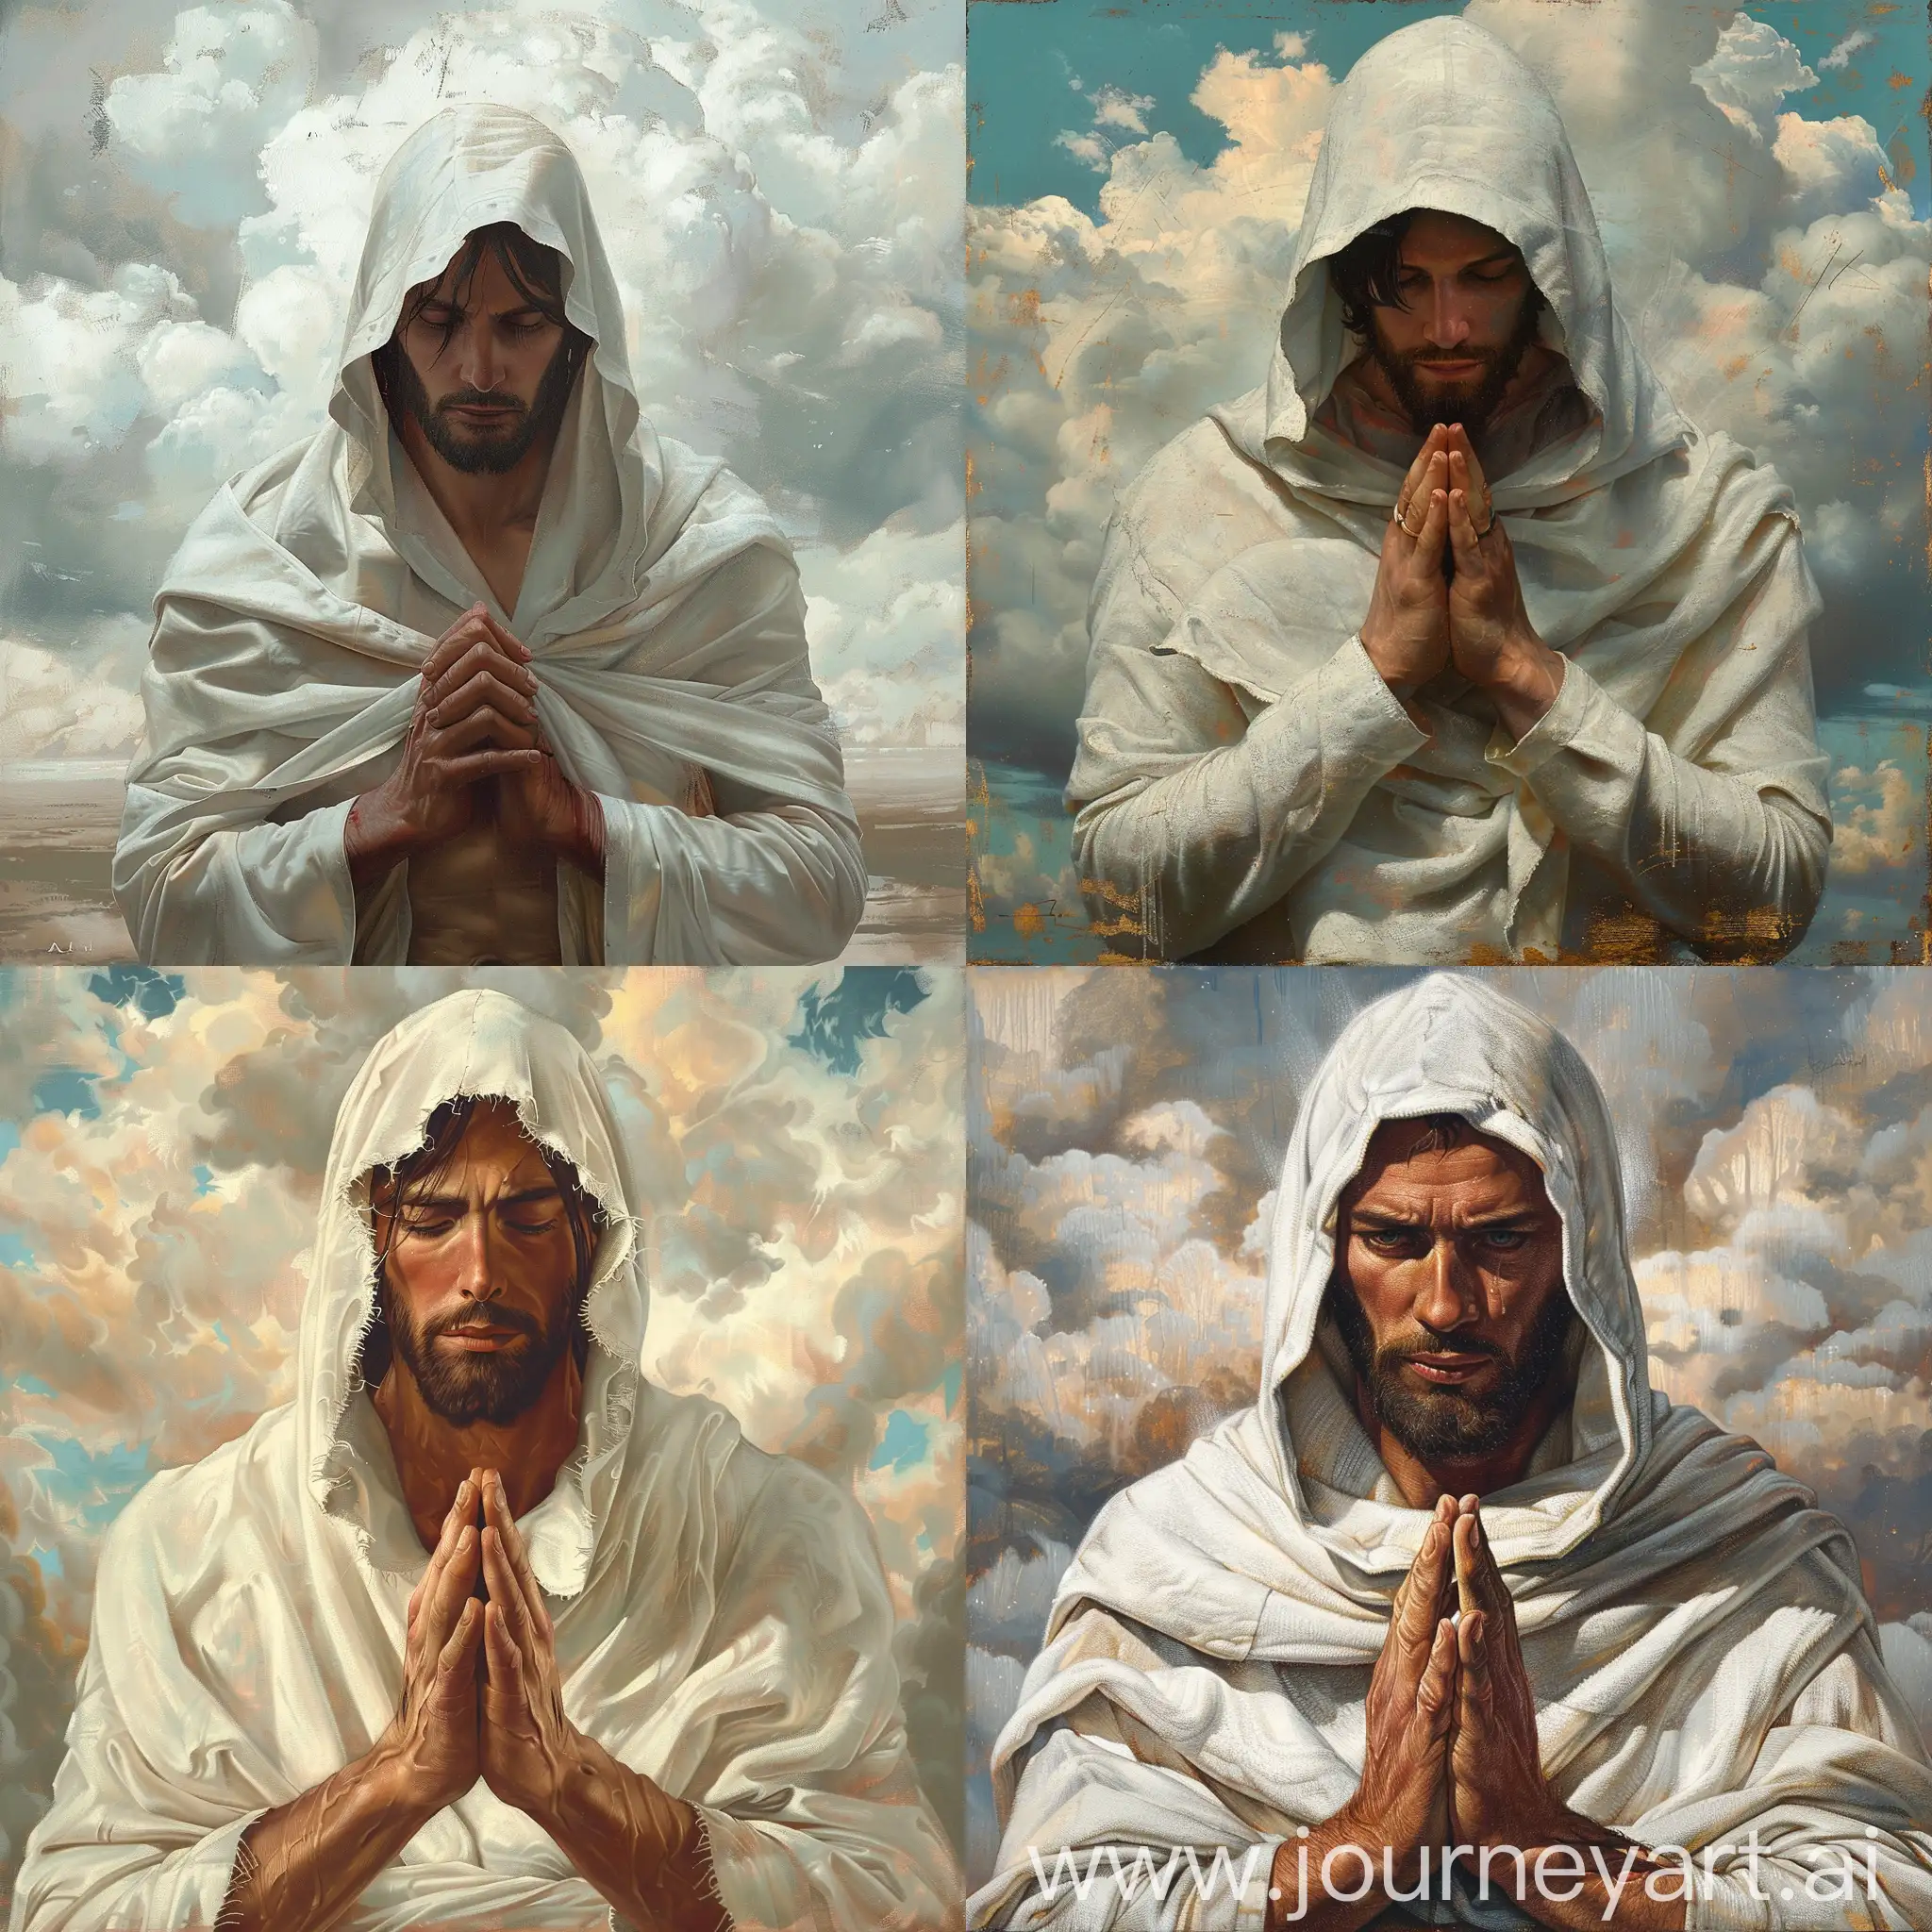 Jesus-Praying-in-White-Robe-against-Cloudy-Sky